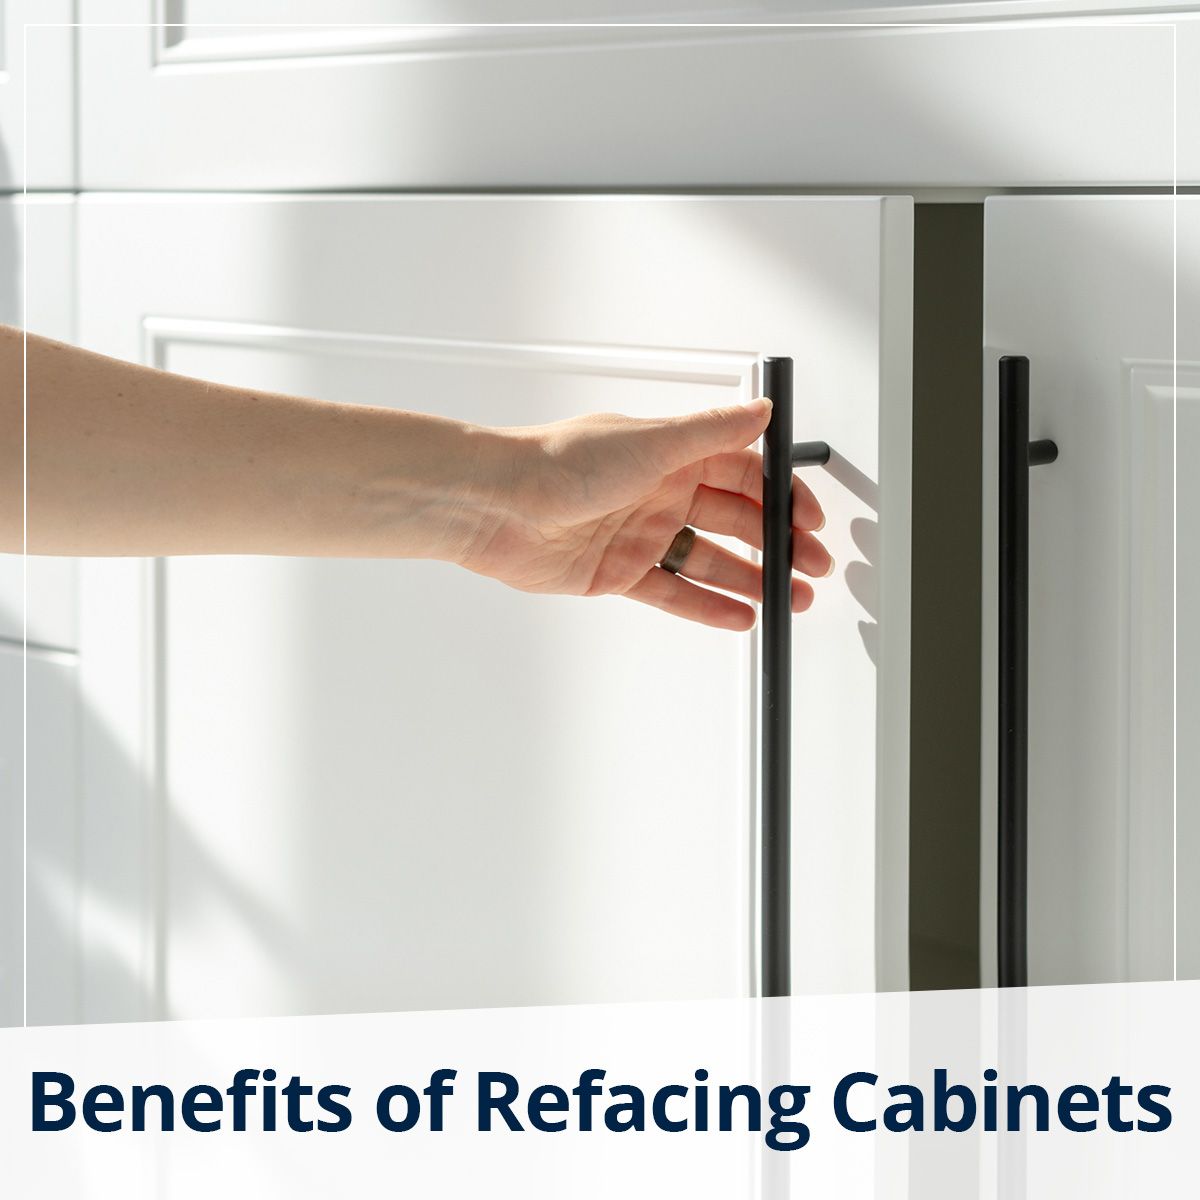 Benefits of Refacing Cabinets